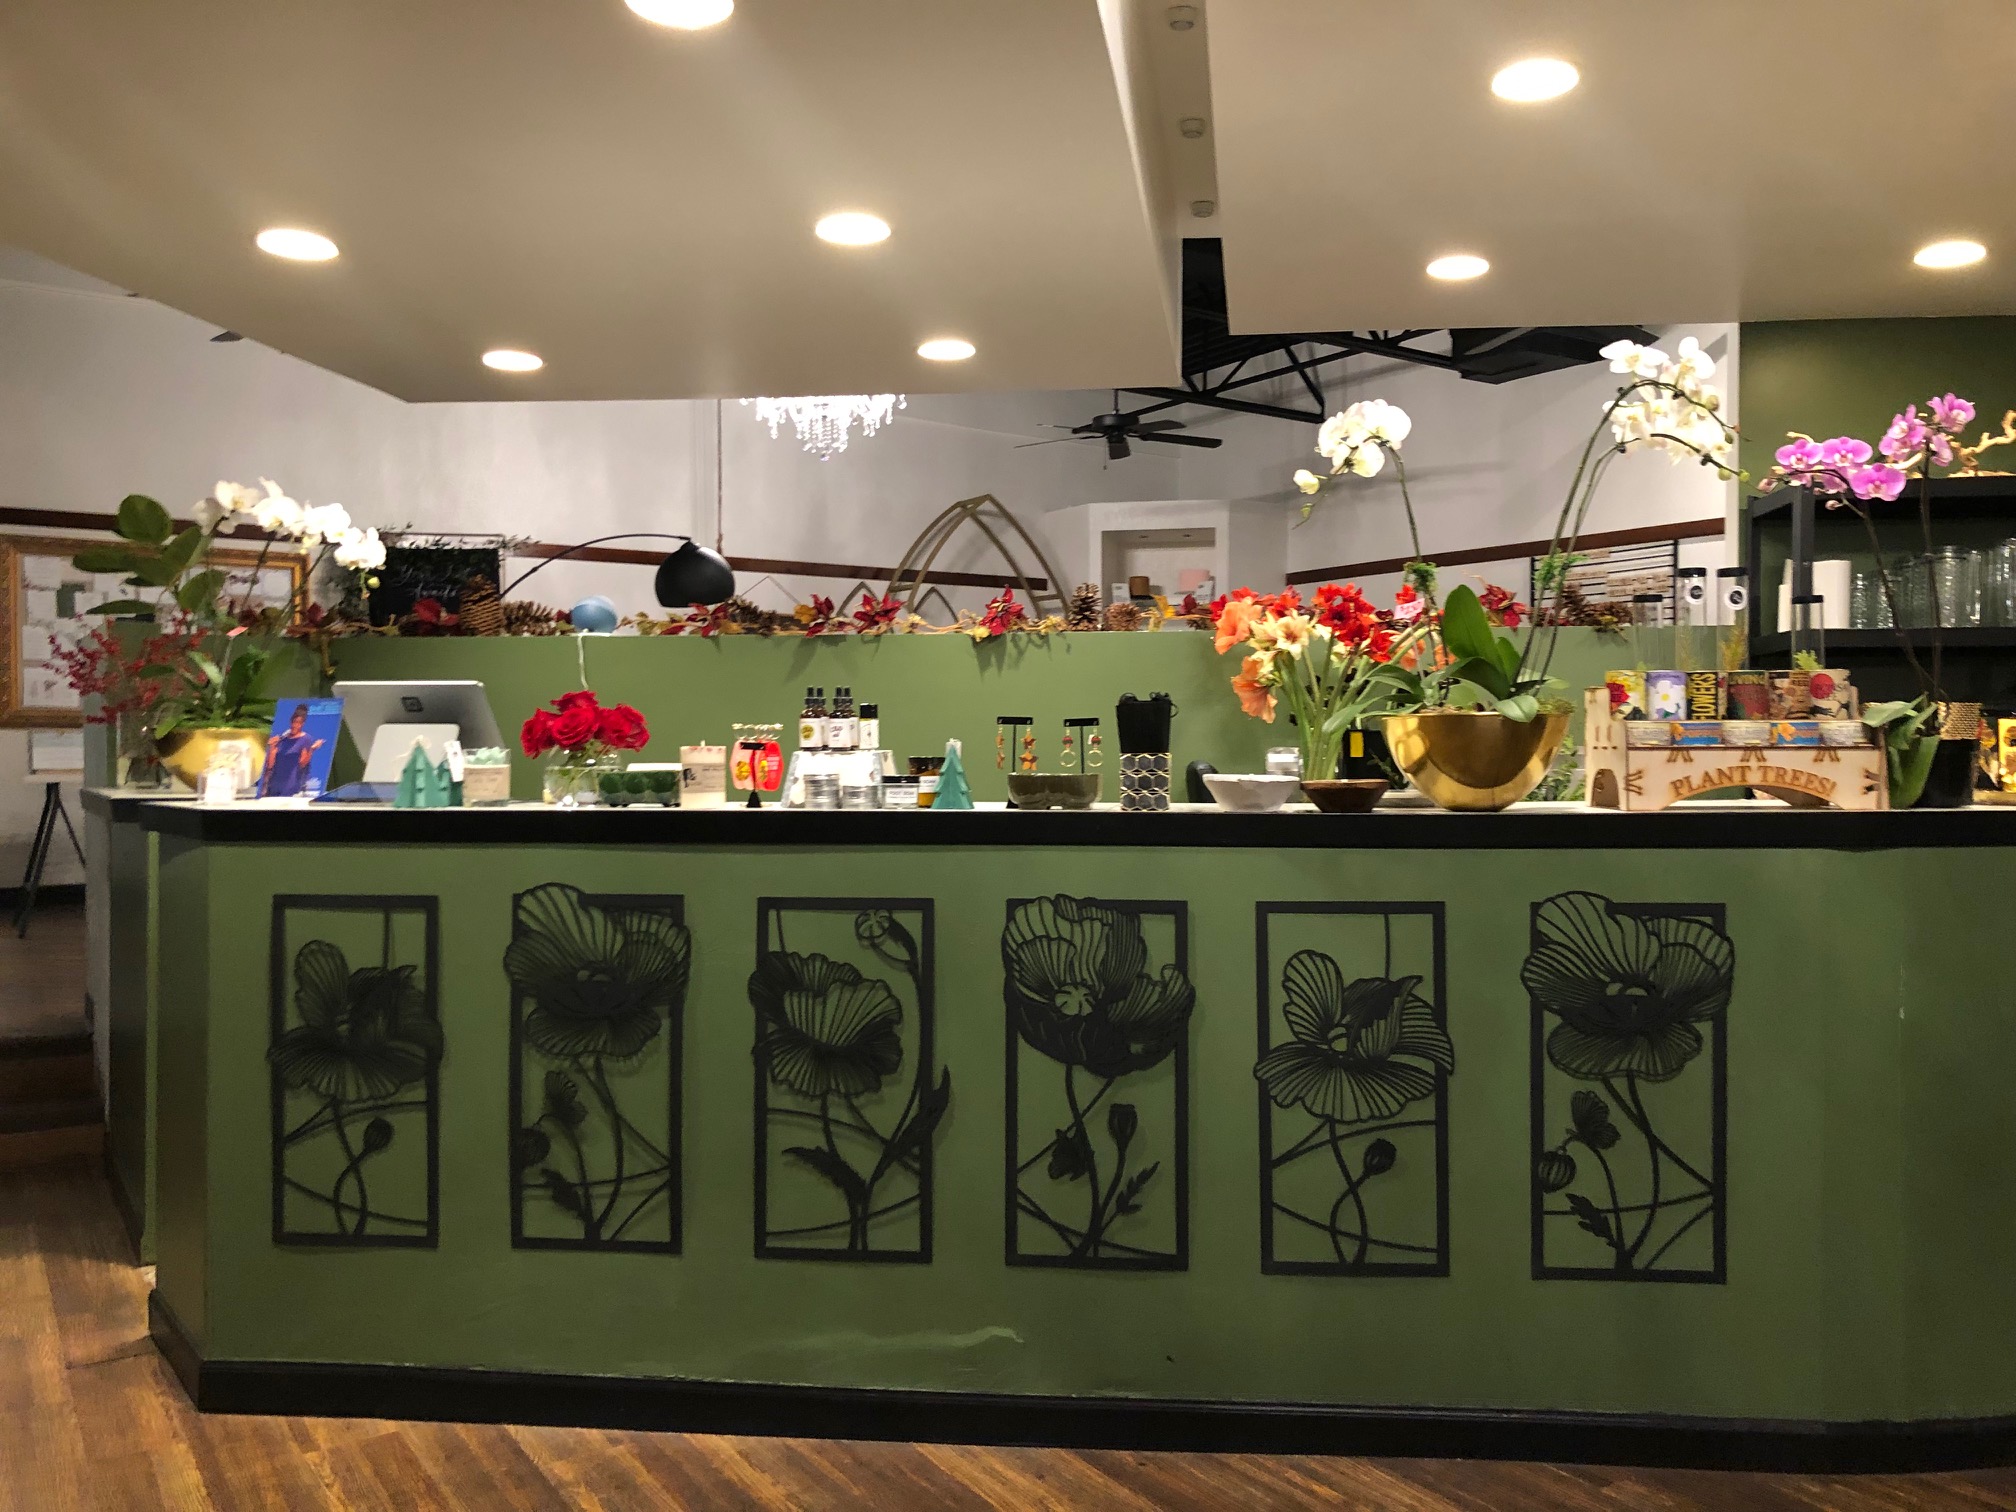 A green counter with black flower art is the feature counter in the CU flower house. Photo by Alyssa Buckley.